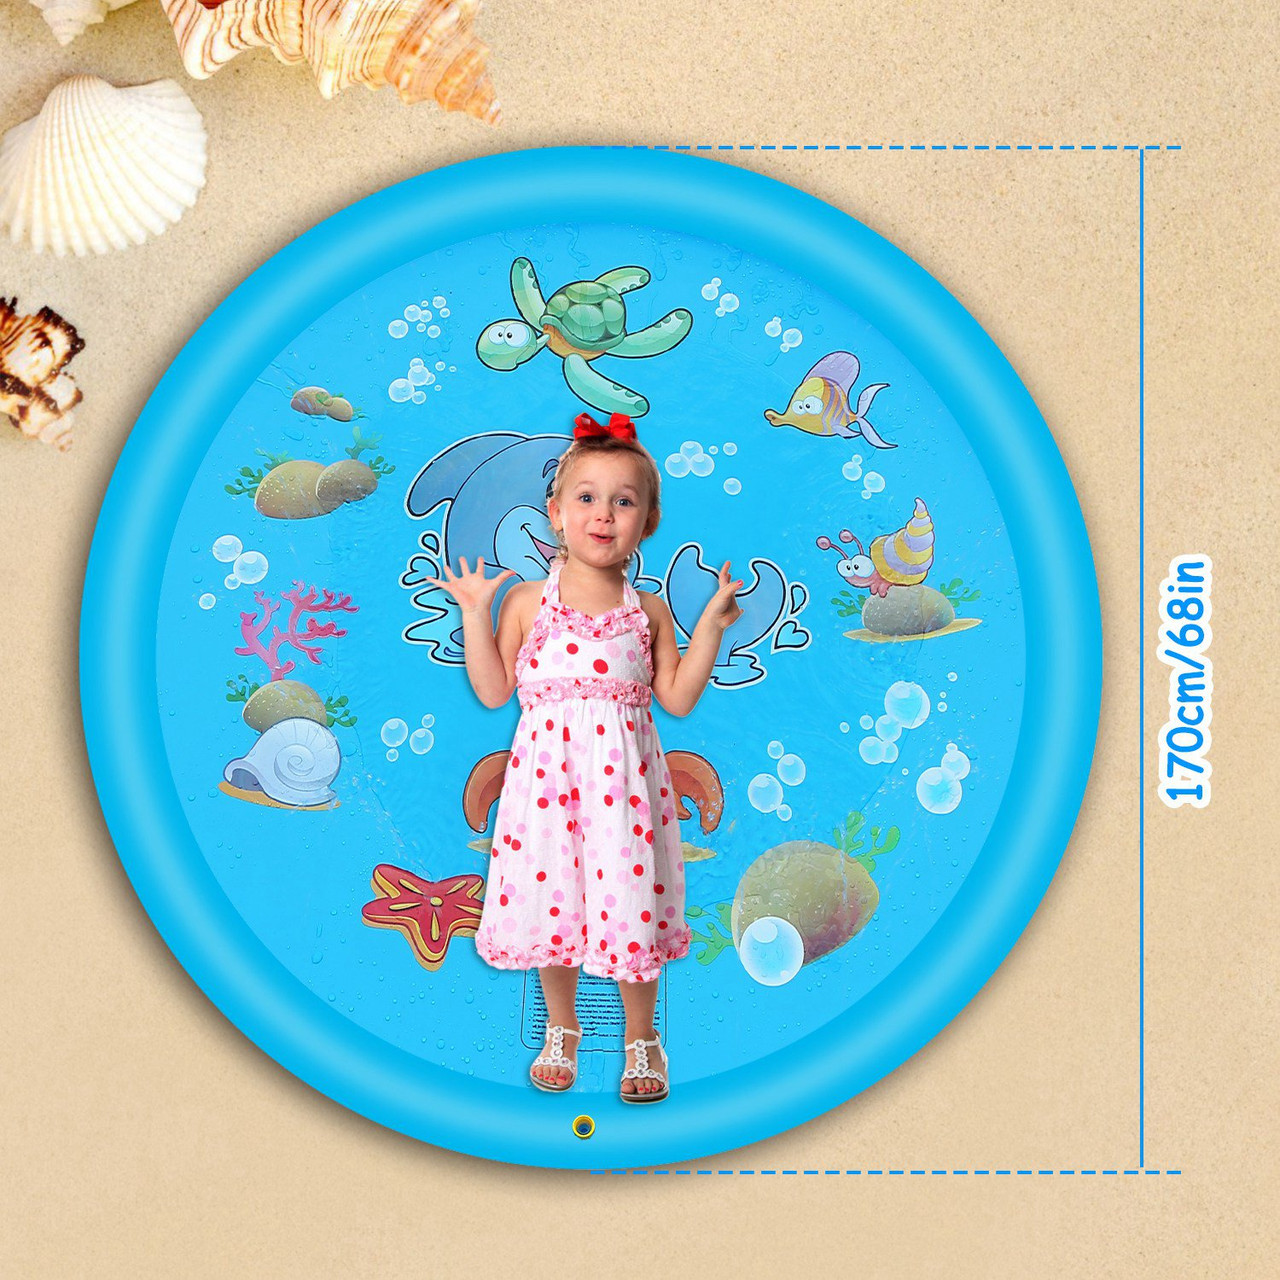 CoolWorld™ Kids' Sprinkler Play Mat product image